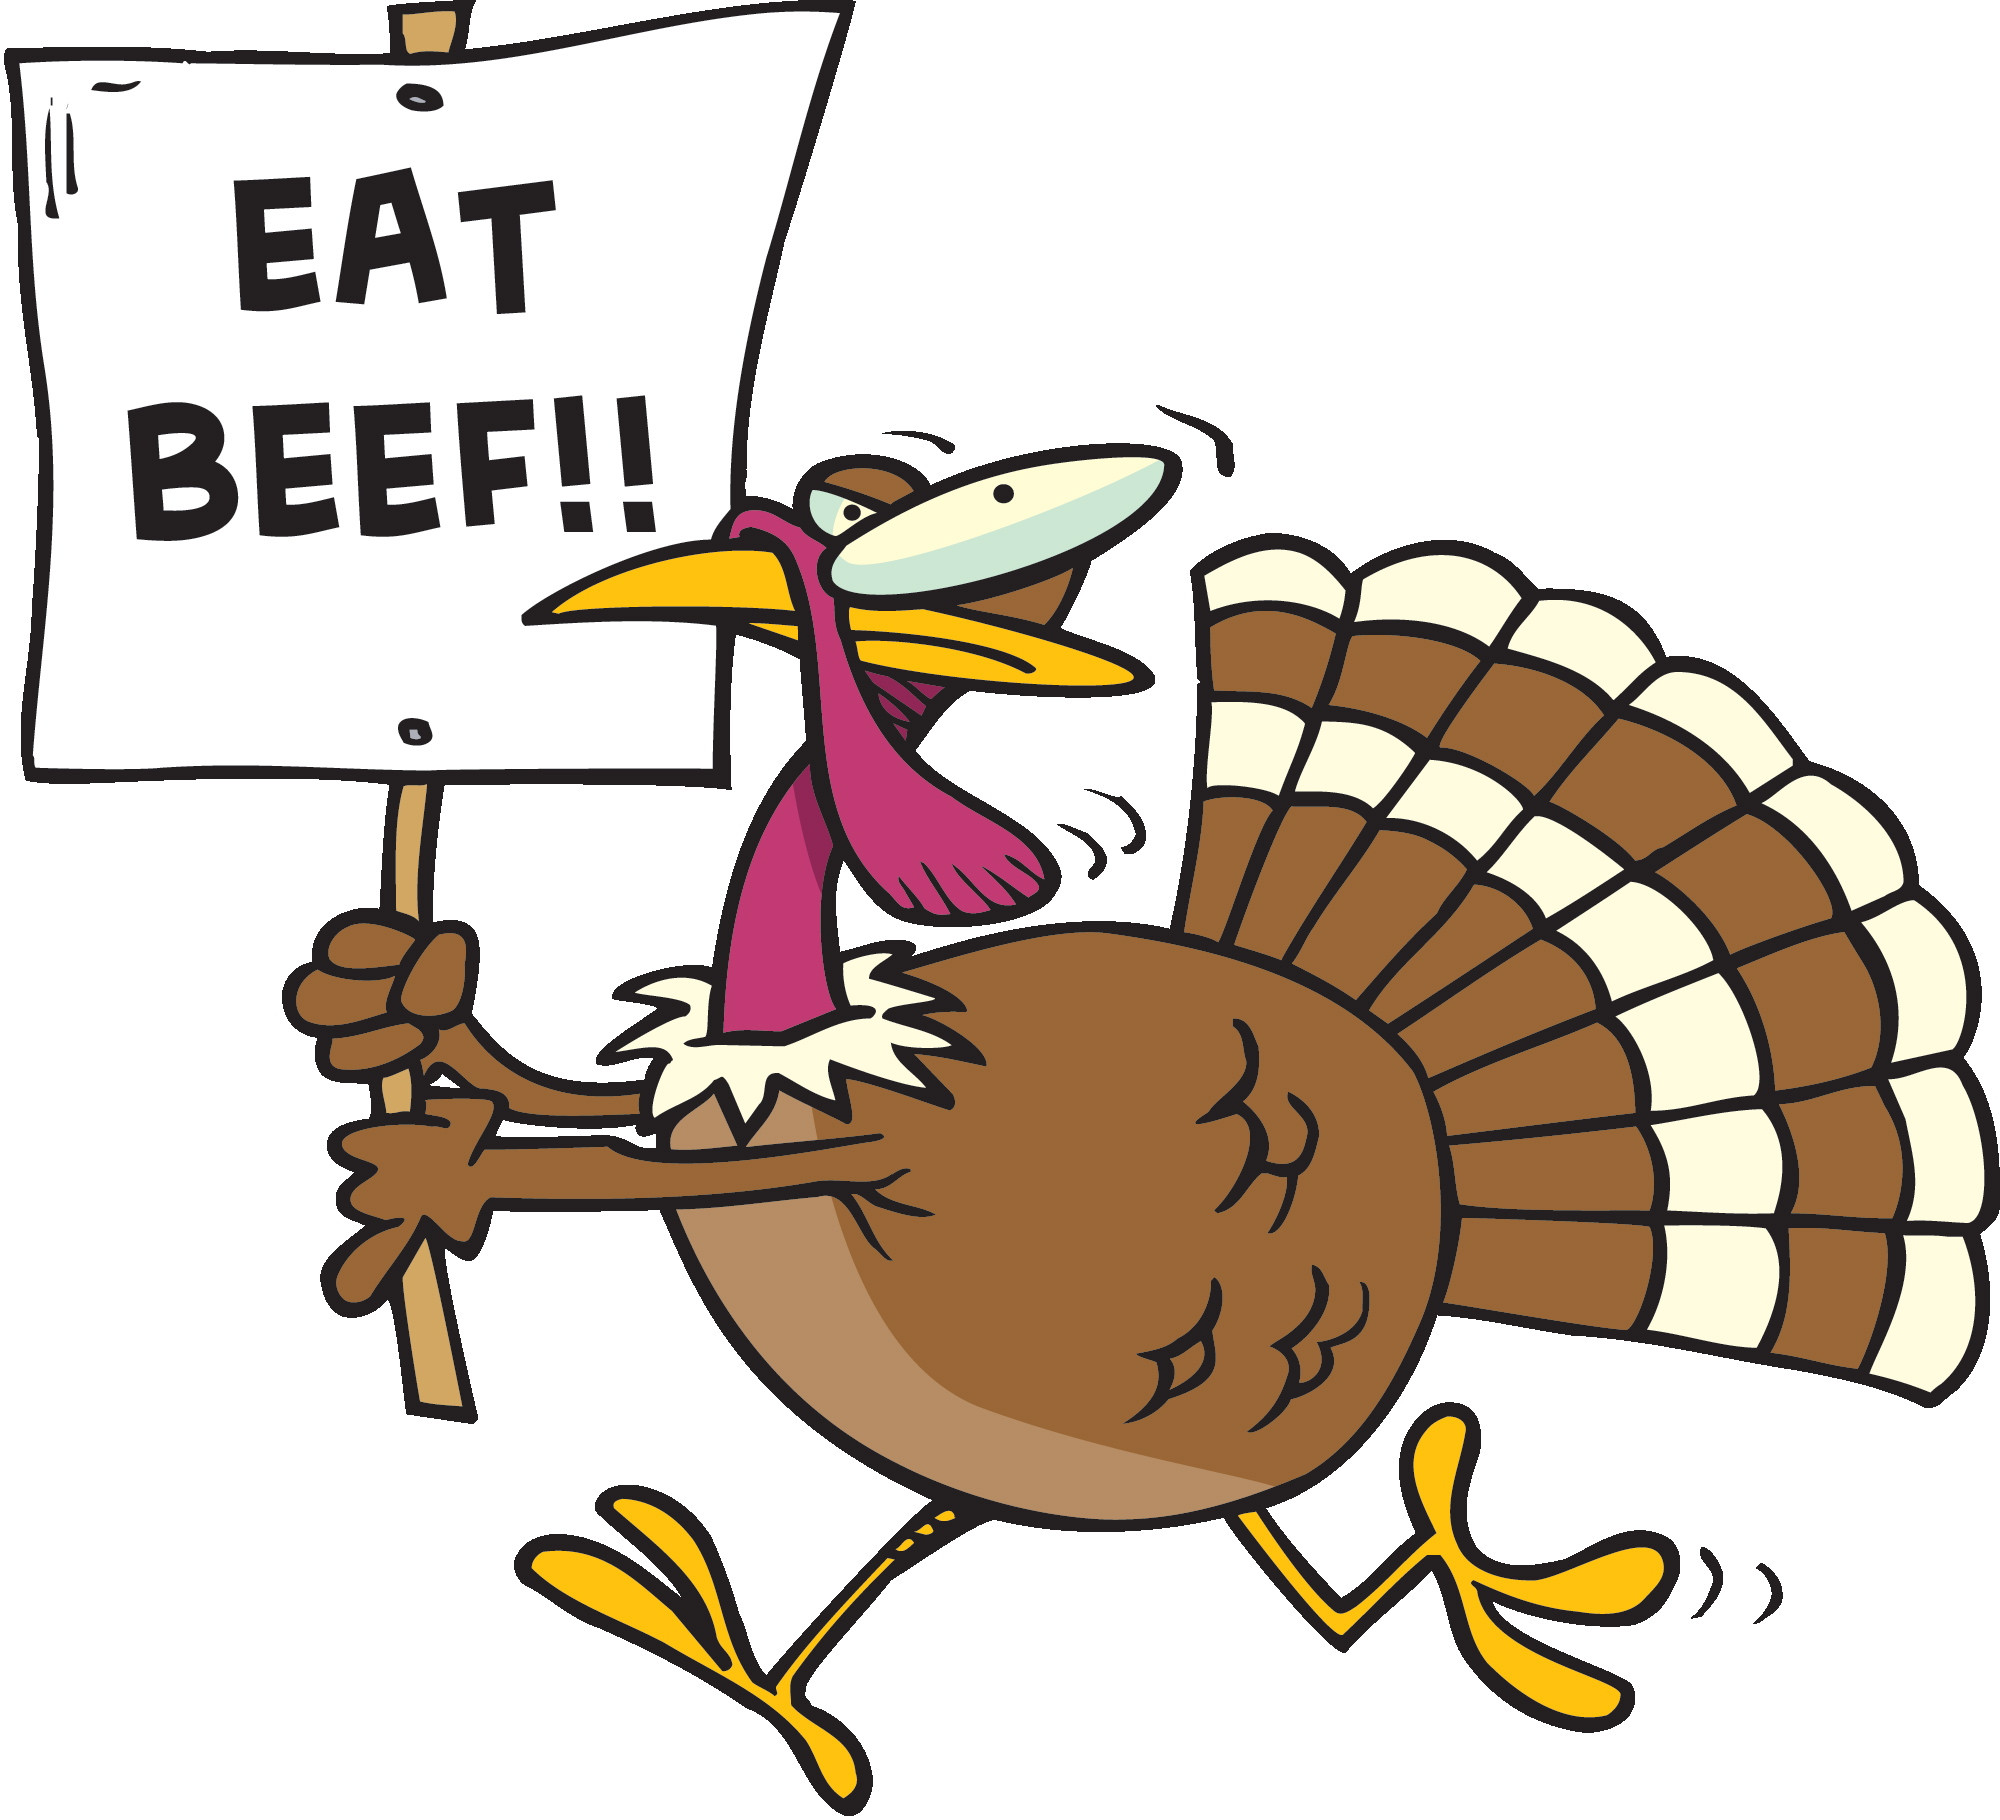 Funny Thanksgiving Turkey Pictures
 Eat Beef Funny Turkey Clipart Image